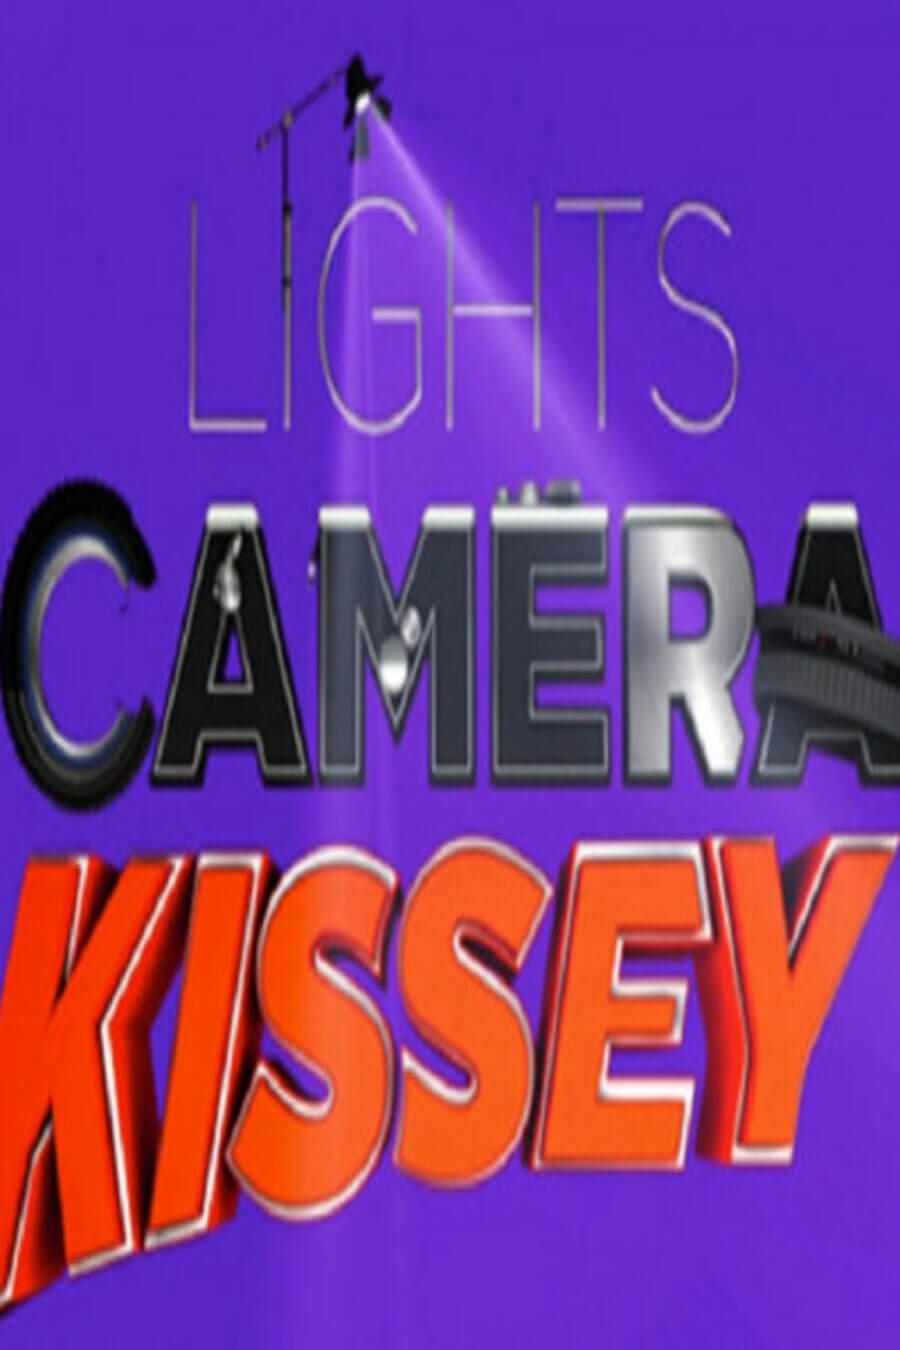 TV ratings for Lights Camera Kissey in Colombia. SonyLIV TV series